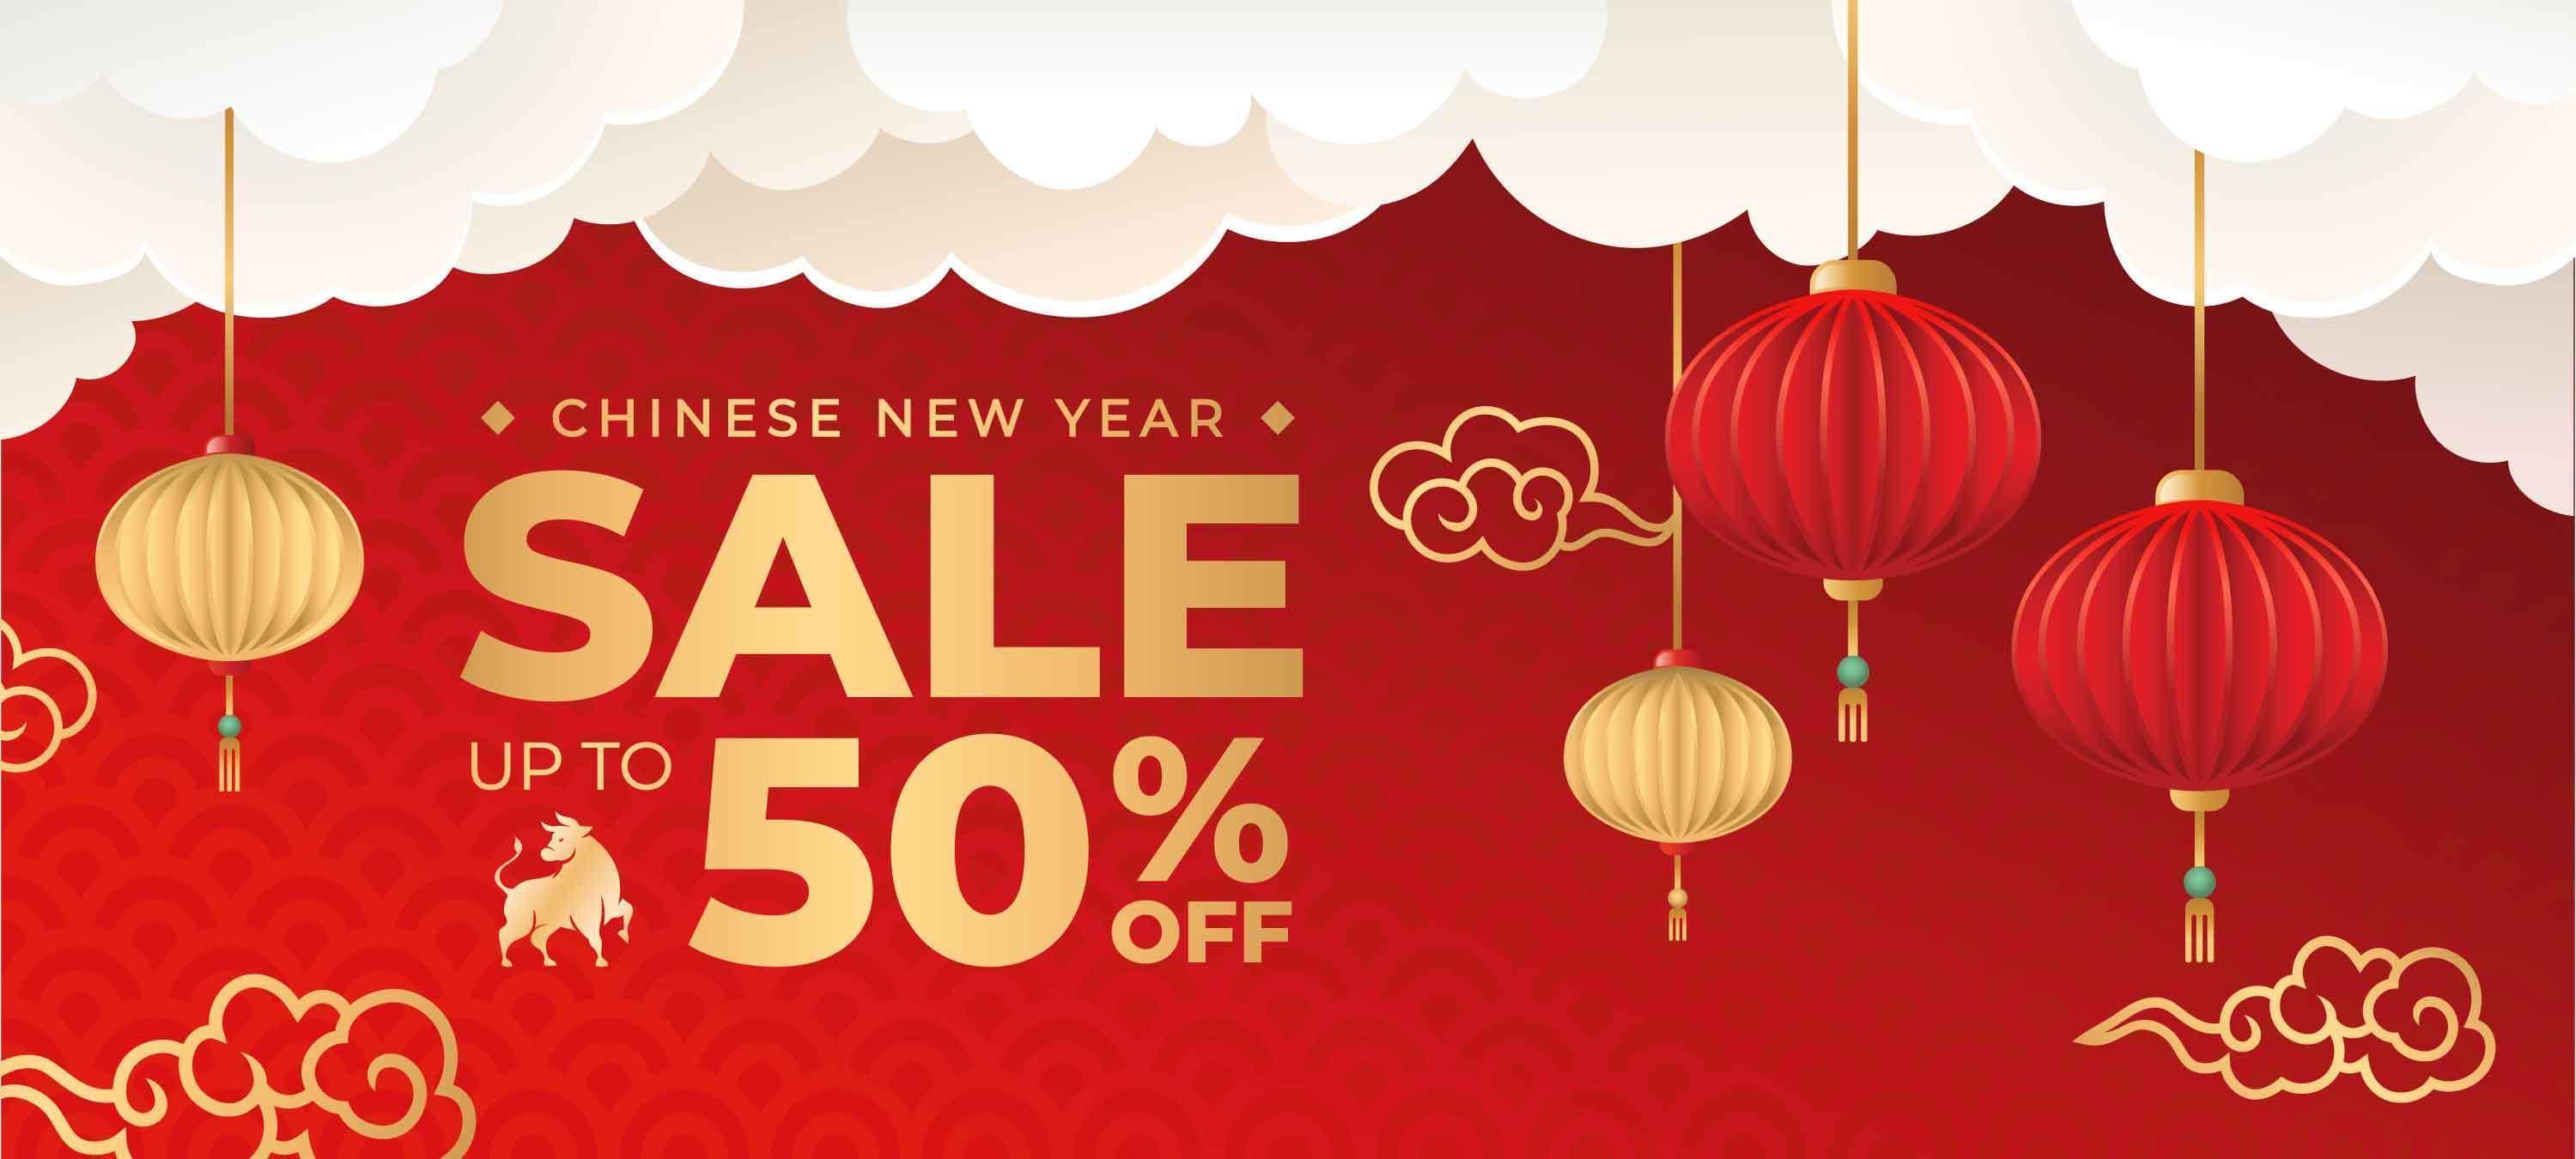 Steam chinese new year sale фото 50